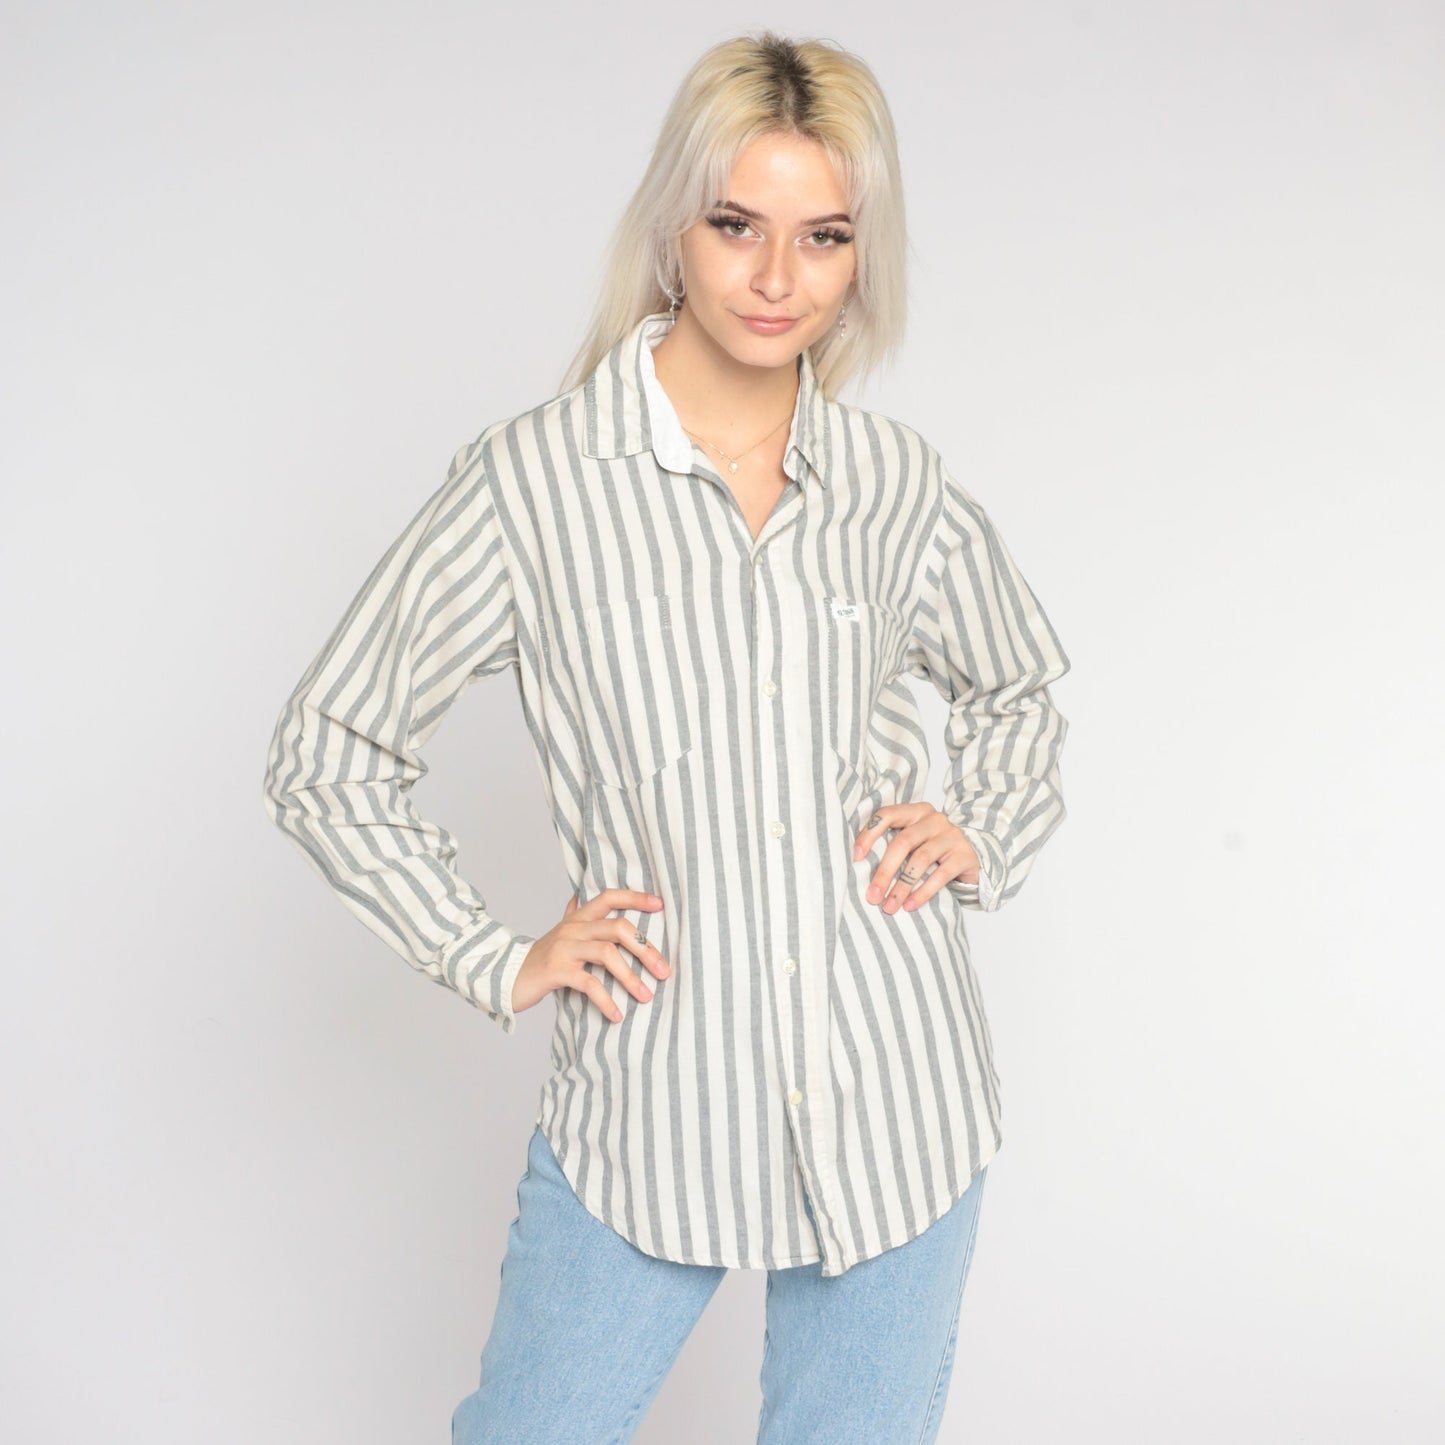 90s GUESS Shirt Grey Striped Shirt White Button Up Blouse Long Sleeve Top Grunge 1990s Vintage Medium Large